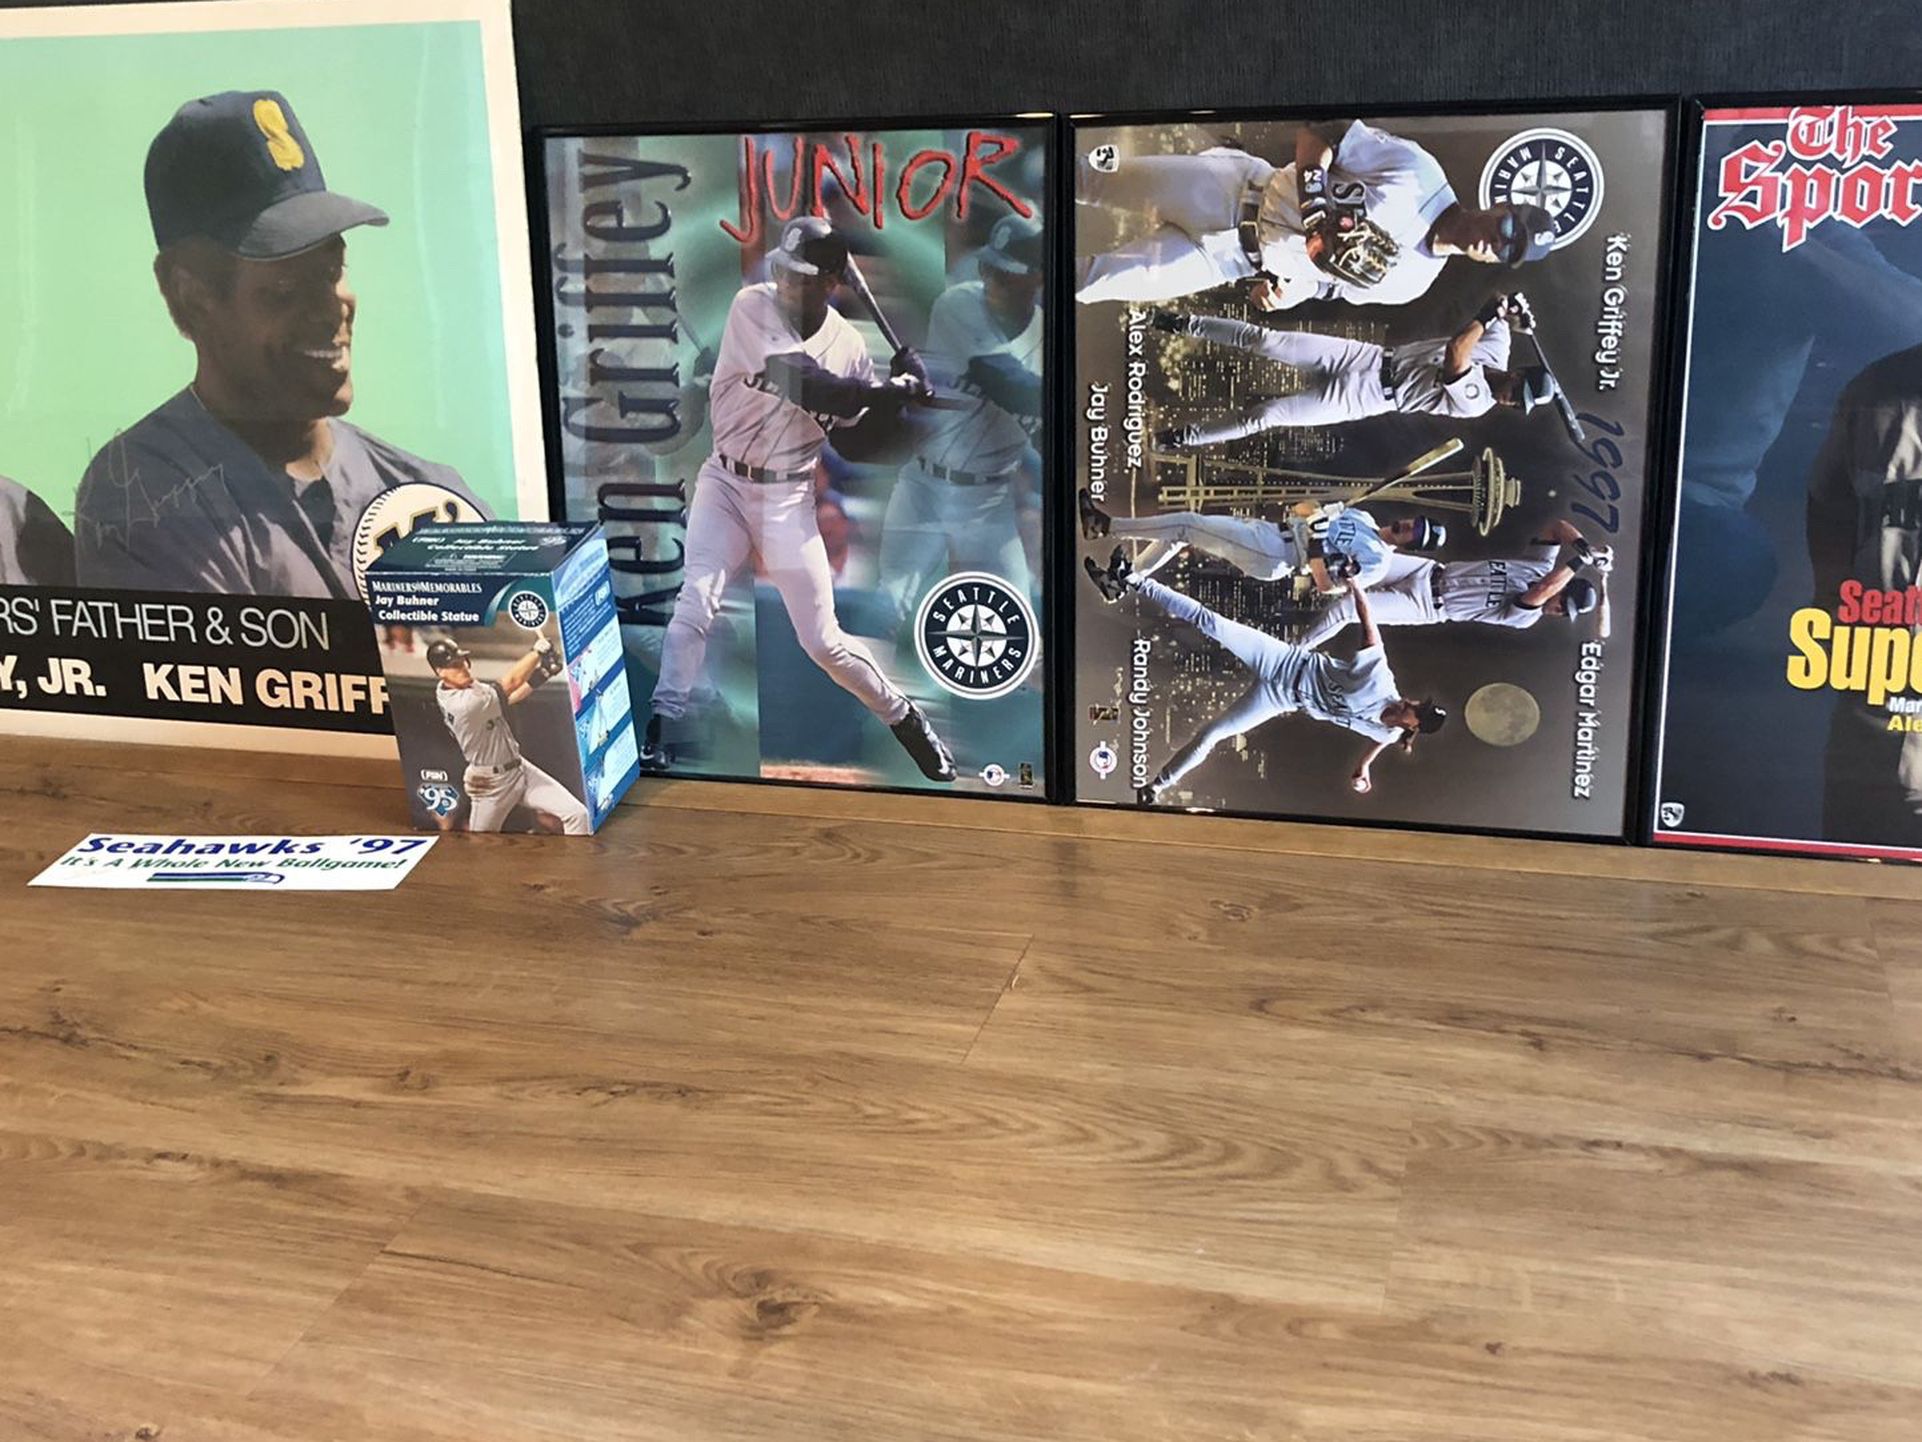 Huge Baseball Card And Seattle Mariners Memorabilia Collection